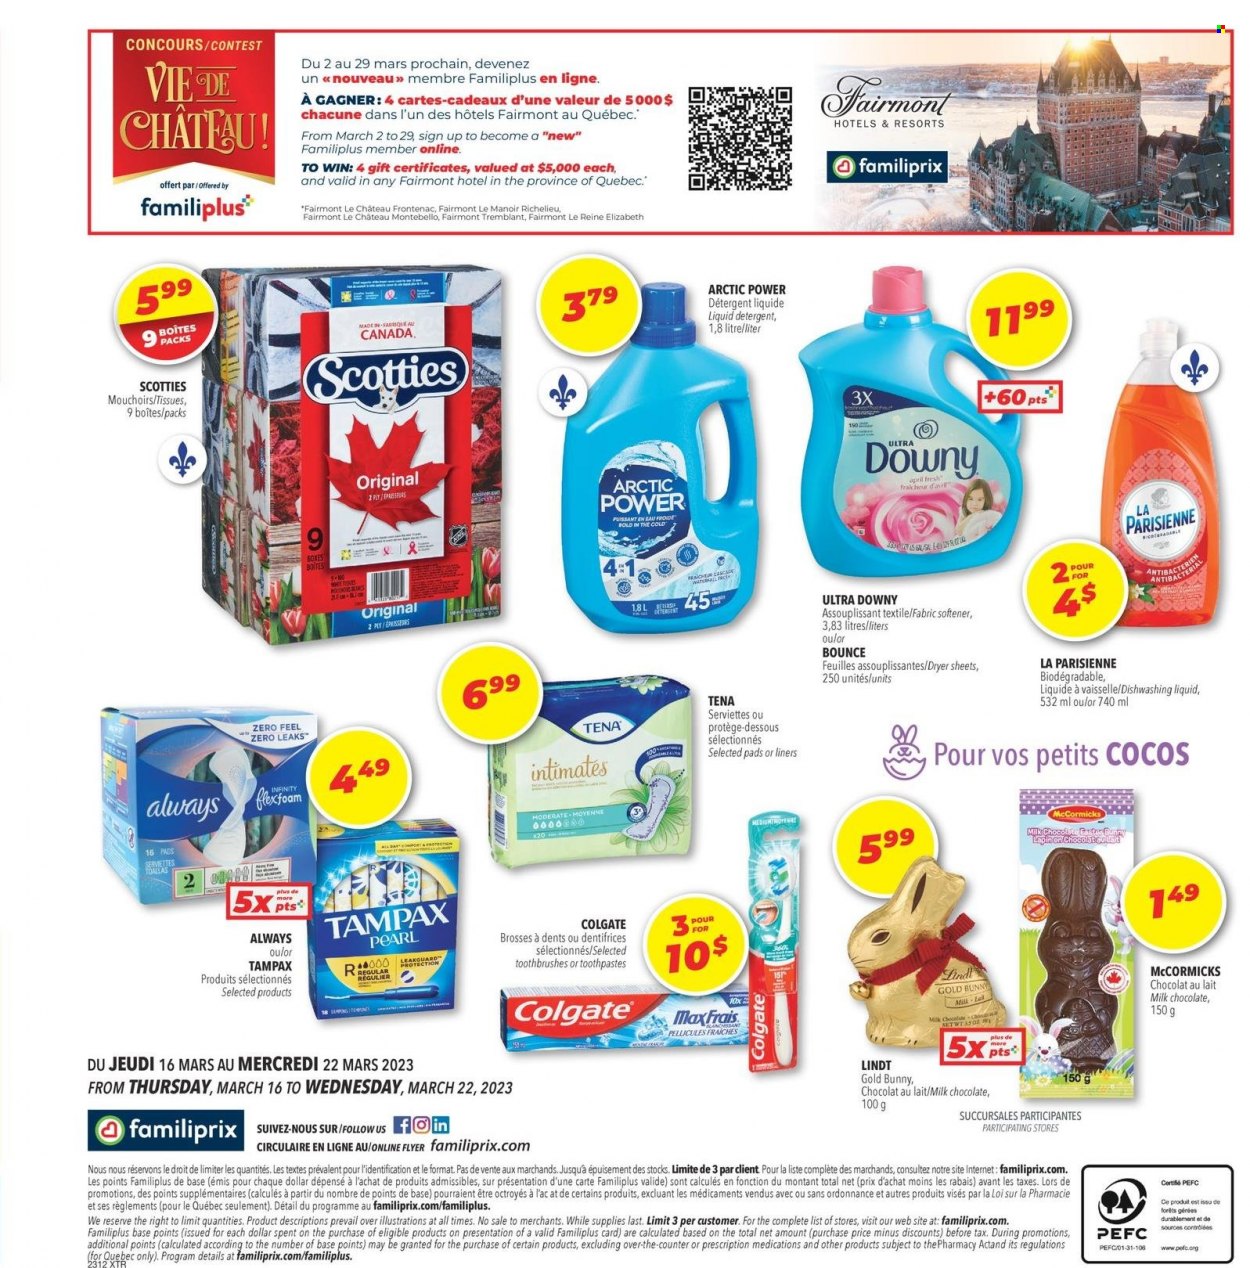 thumbnail - Familiprix Extra Flyer - March 16, 2023 - March 22, 2023 - Sales products - milk chocolate, chocolate, Mars, tissues, fabric softener, liquid detergent, Bounce, Cascade, dryer sheets, dishwashing liquid, sanitary pads, tampons, Infinity, detergent, Colgate, Tampax, Lindt, Tena Lady. Page 2.